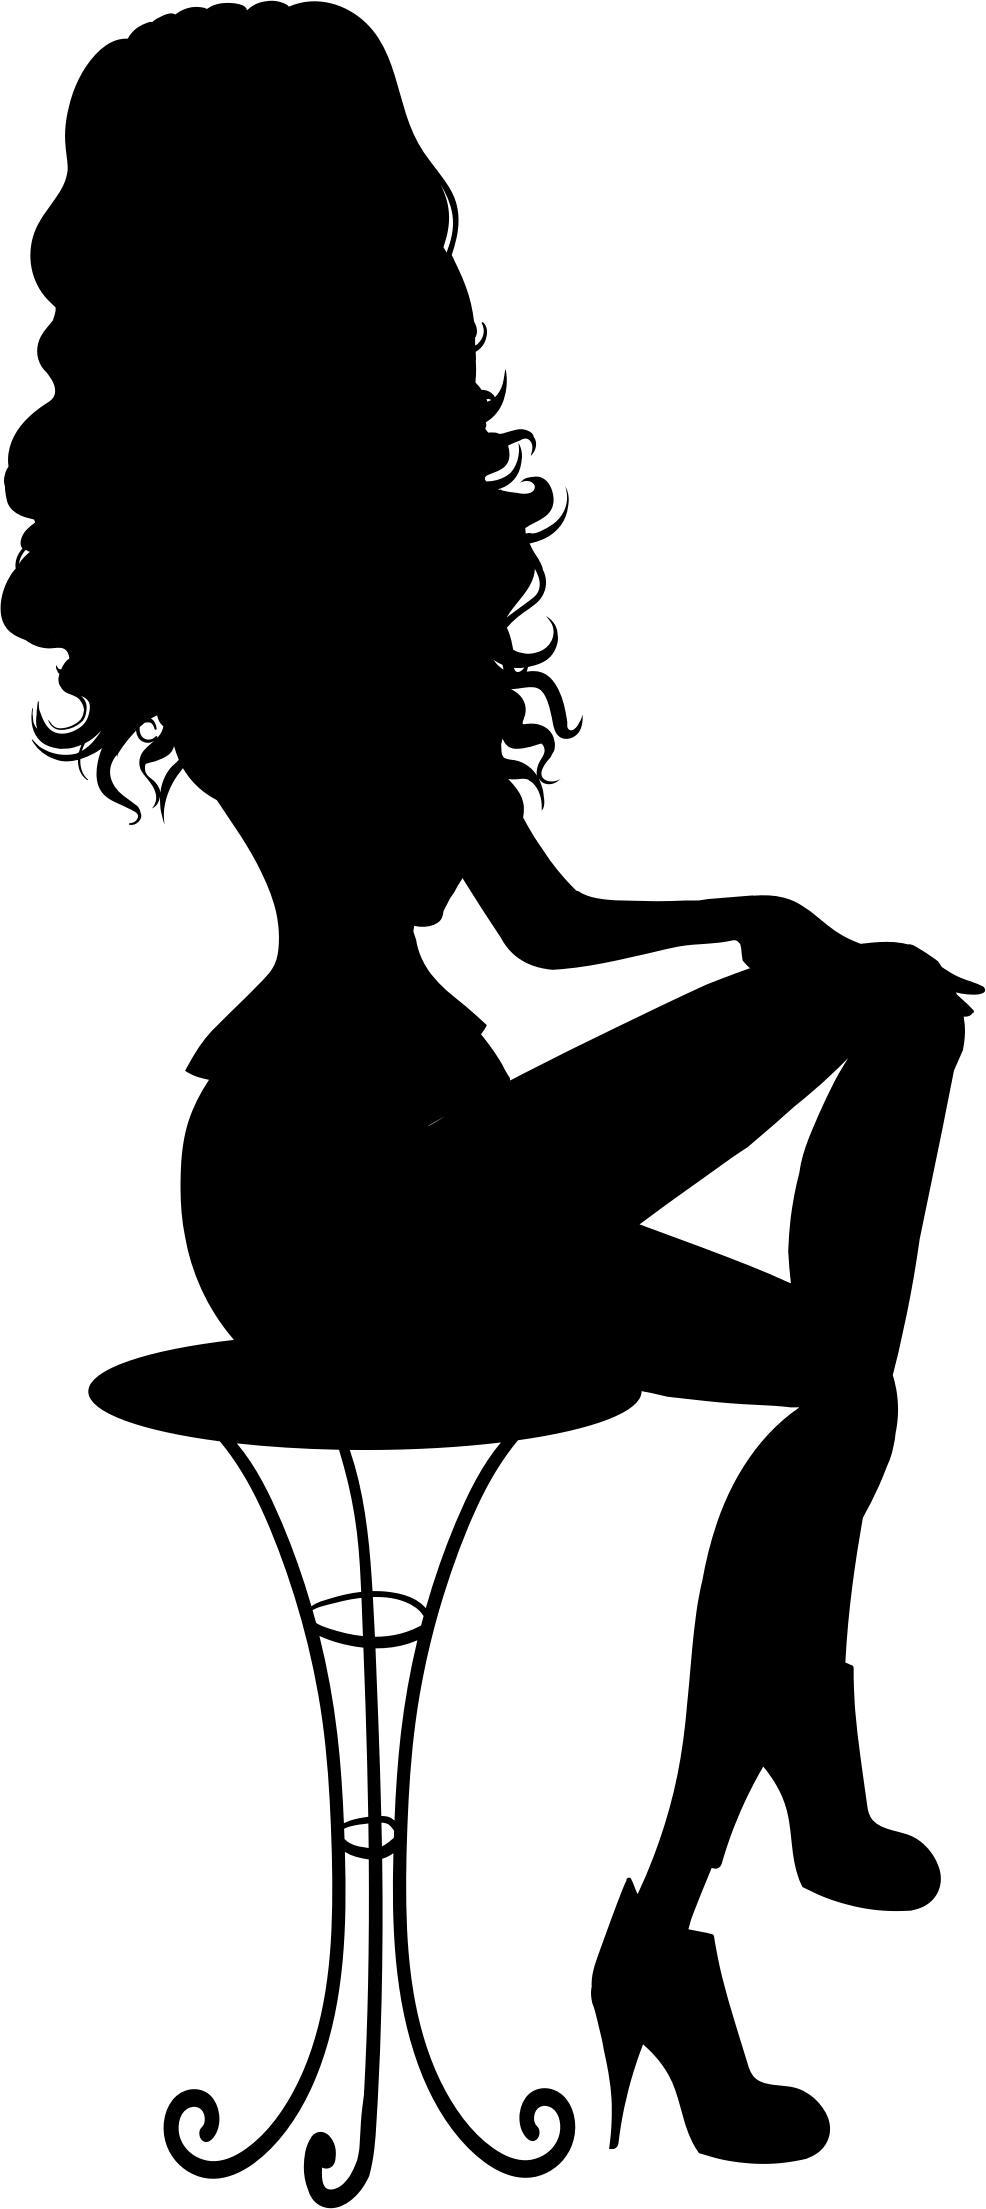 Sitting Woman Silhouette png transparent